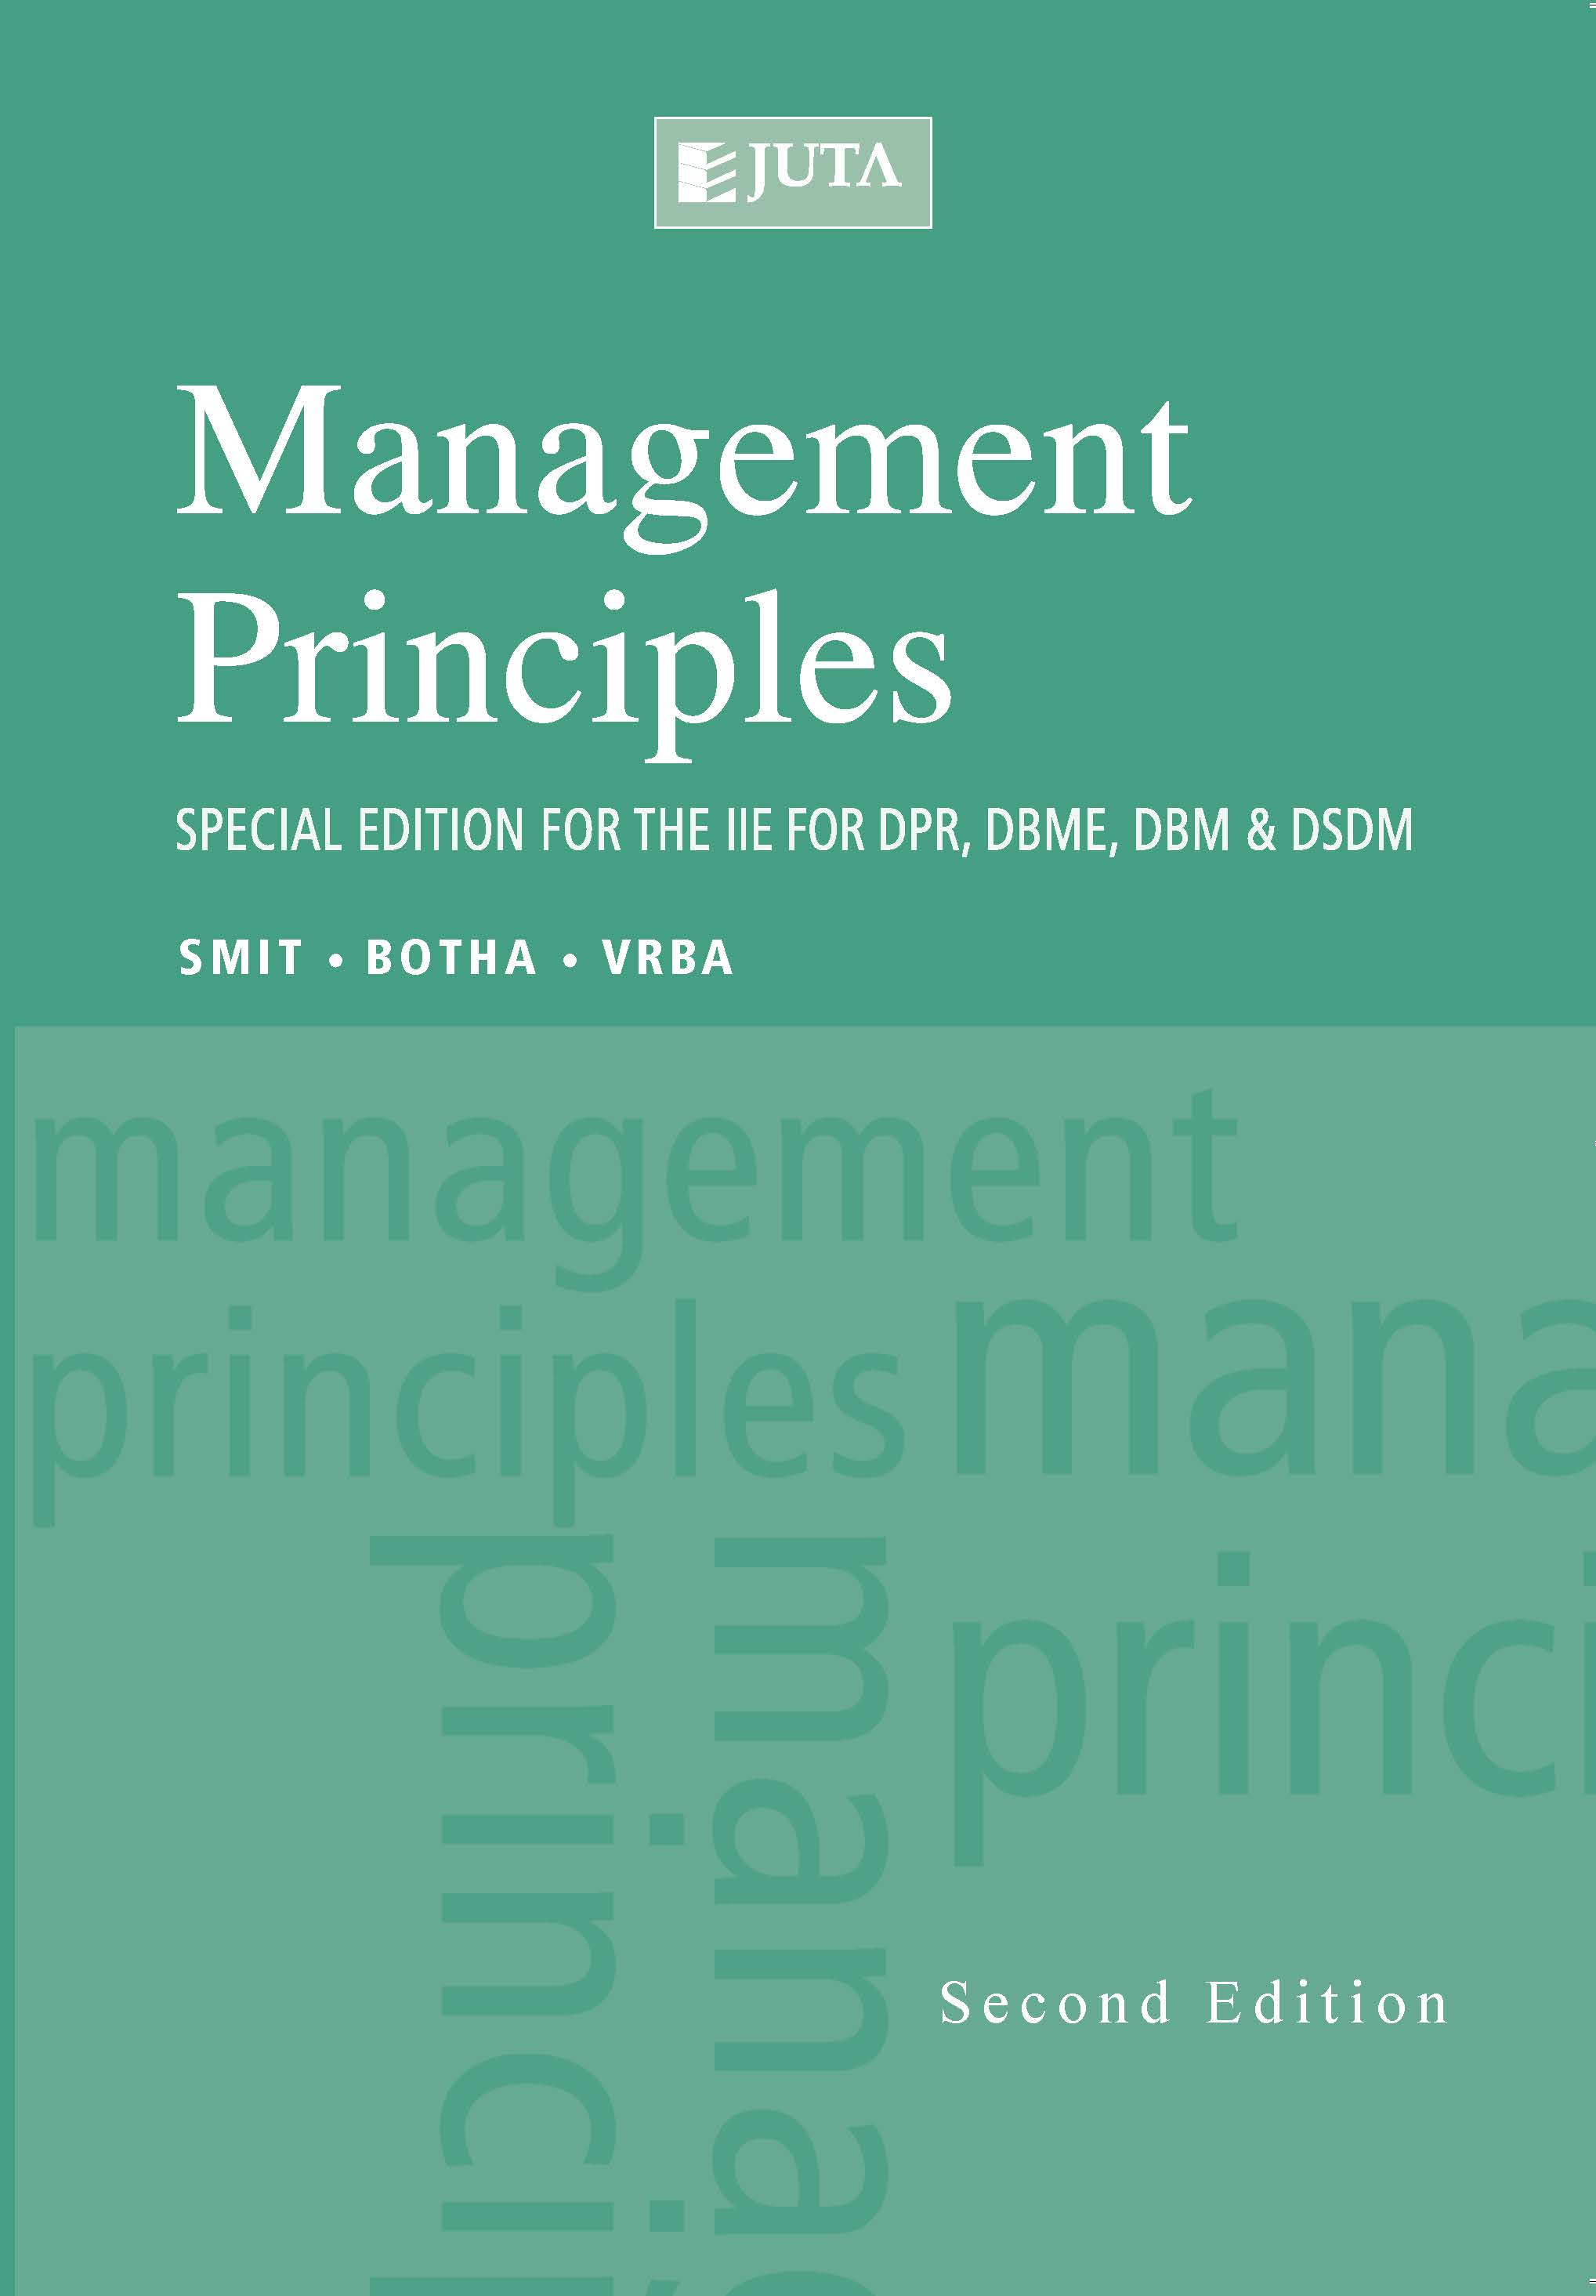 Management Principles: Special Edition for the IIE for DPR, DBME, DBM & DSDM